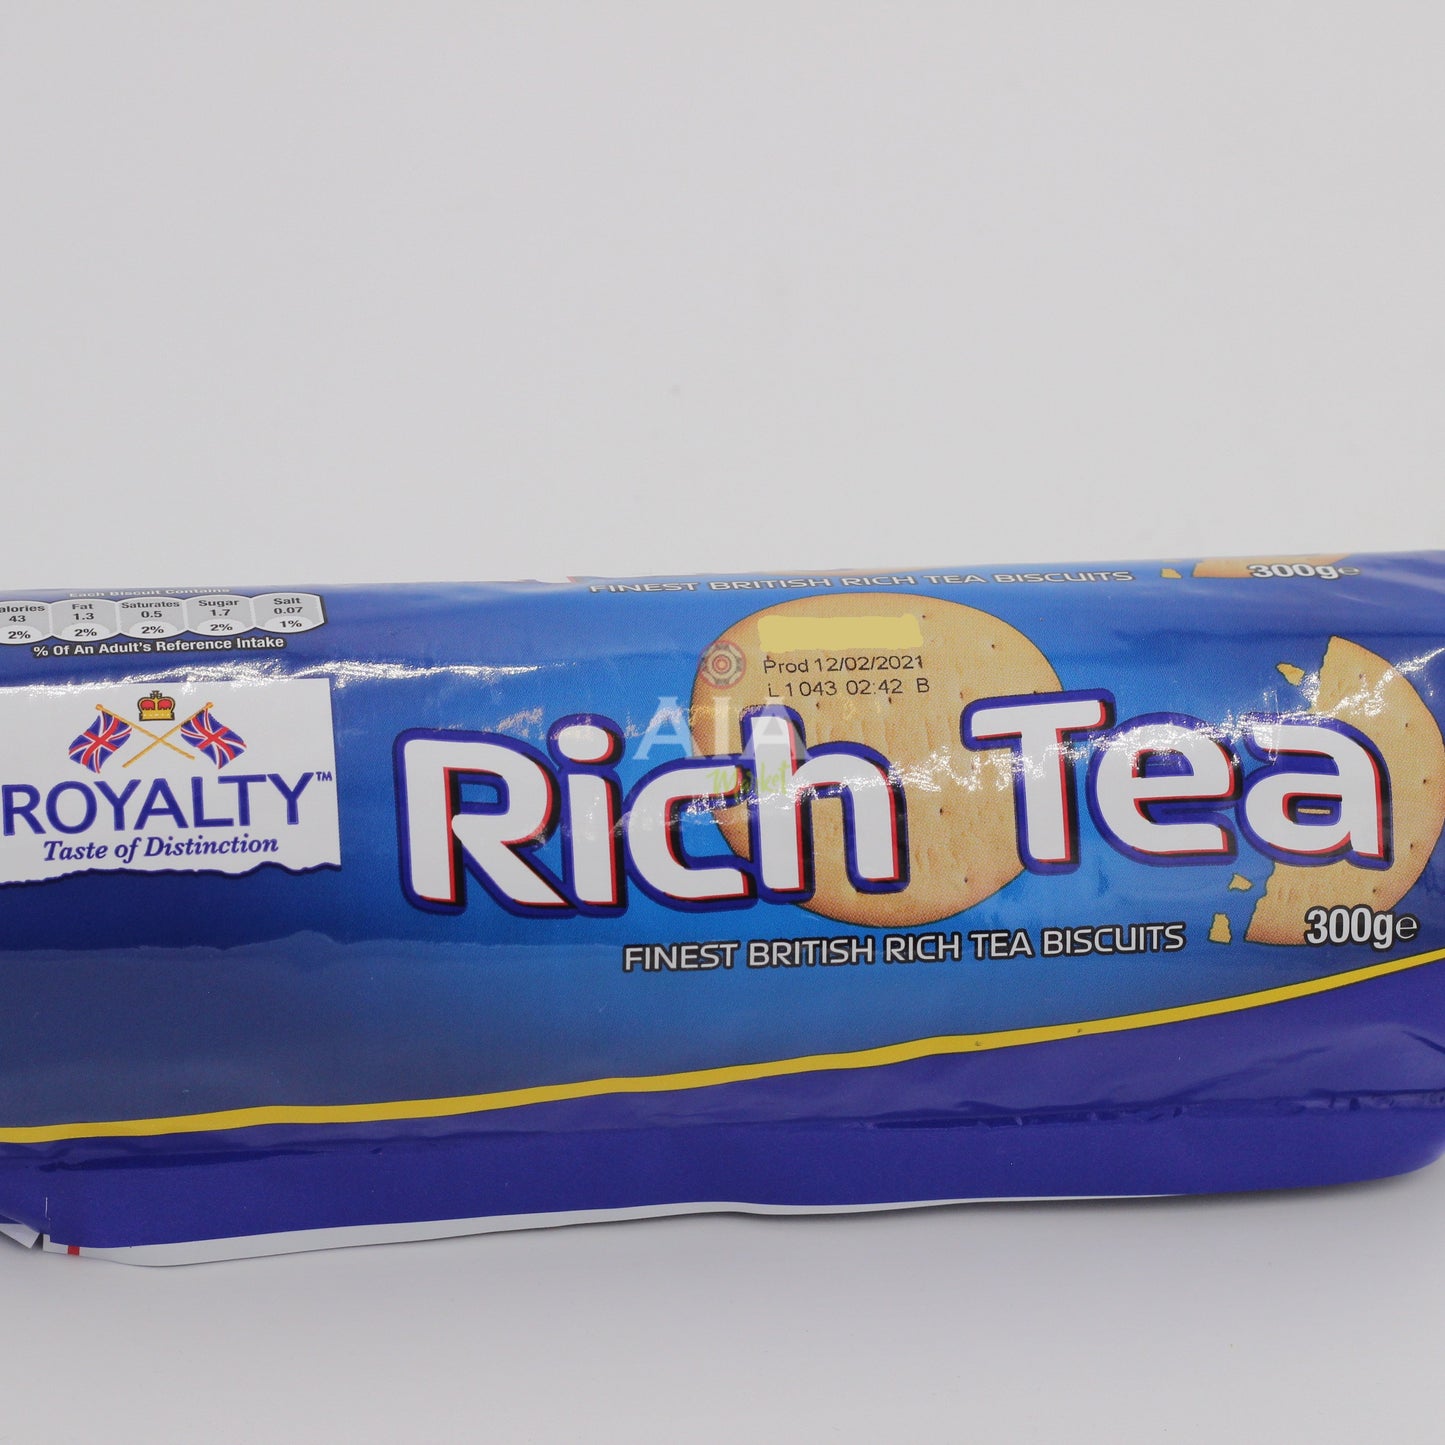 ROYALTY Biscuits au The riche 300g